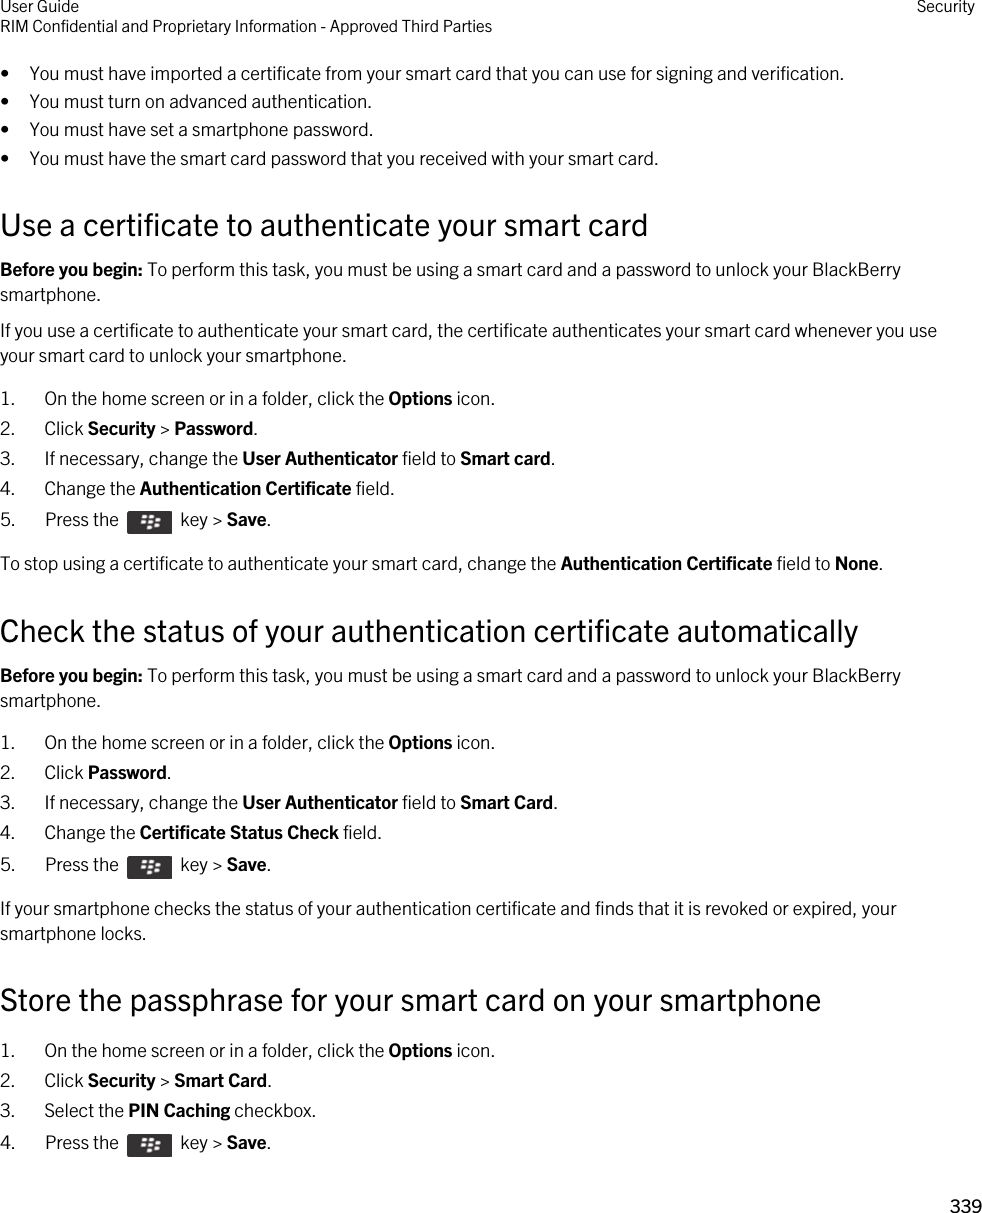 • You must have imported a certificate from your smart card that you can use for signing and verification.• You must turn on advanced authentication.• You must have set a smartphone password.• You must have the smart card password that you received with your smart card.Use a certificate to authenticate your smart cardBefore you begin: To perform this task, you must be using a smart card and a password to unlock your BlackBerry smartphone. If you use a certificate to authenticate your smart card, the certificate authenticates your smart card whenever you use your smart card to unlock your smartphone.1. On the home screen or in a folder, click the Options icon.2. Click Security &gt; Password.3. If necessary, change the User Authenticator field to Smart card.4. Change the Authentication Certificate field.5.  Press the    key &gt; Save. To stop using a certificate to authenticate your smart card, change the Authentication Certificate field to None.Check the status of your authentication certificate automaticallyBefore you begin: To perform this task, you must be using a smart card and a password to unlock your BlackBerry smartphone. 1. On the home screen or in a folder, click the Options icon.2. Click Password.3. If necessary, change the User Authenticator field to Smart Card.4. Change the Certificate Status Check field.5.  Press the    key &gt; Save. If your smartphone checks the status of your authentication certificate and finds that it is revoked or expired, your smartphone locks.Store the passphrase for your smart card on your smartphone1. On the home screen or in a folder, click the Options icon.2. Click Security &gt; Smart Card.3. Select the PIN Caching checkbox.4.  Press the    key &gt; Save. User GuideRIM Confidential and Proprietary Information - Approved Third Parties Security339 